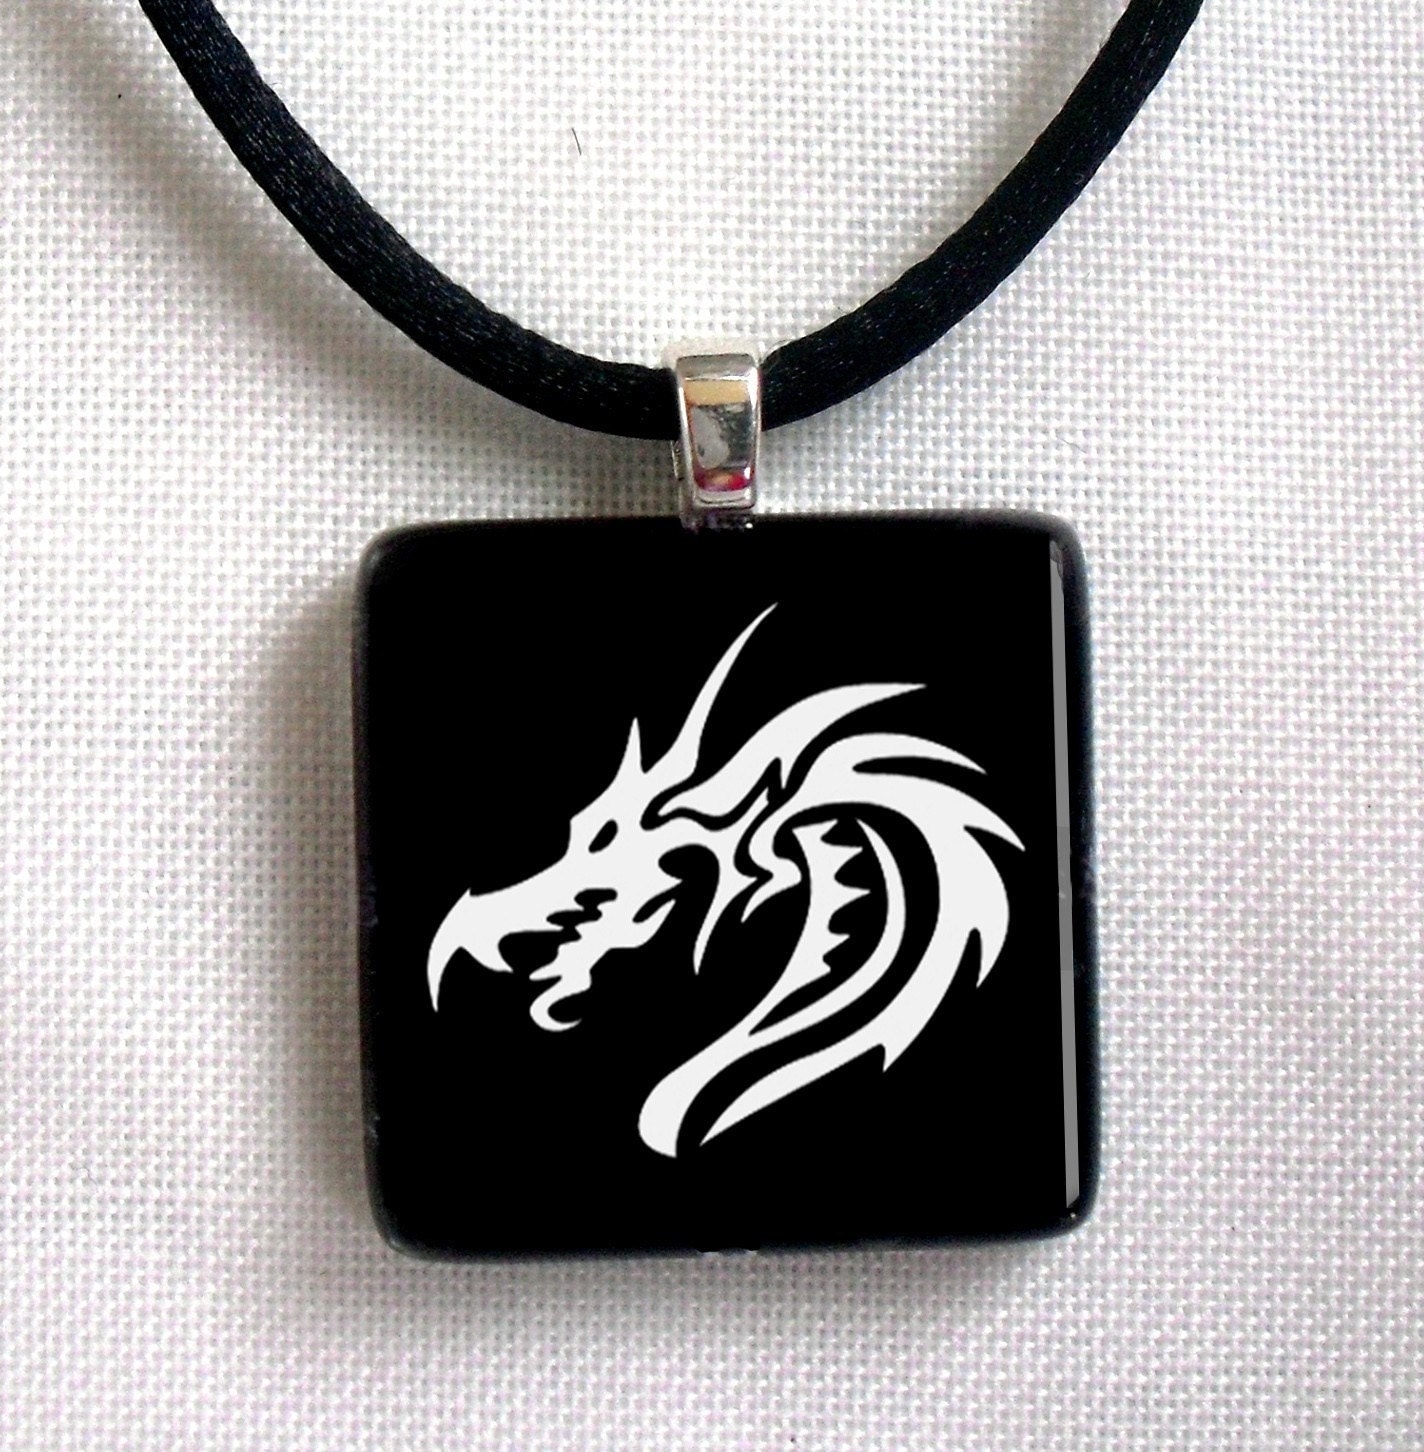 Chinese dragon, 1 inch Square Glass Tile Art Photo Pendant (with Necklace Gift)